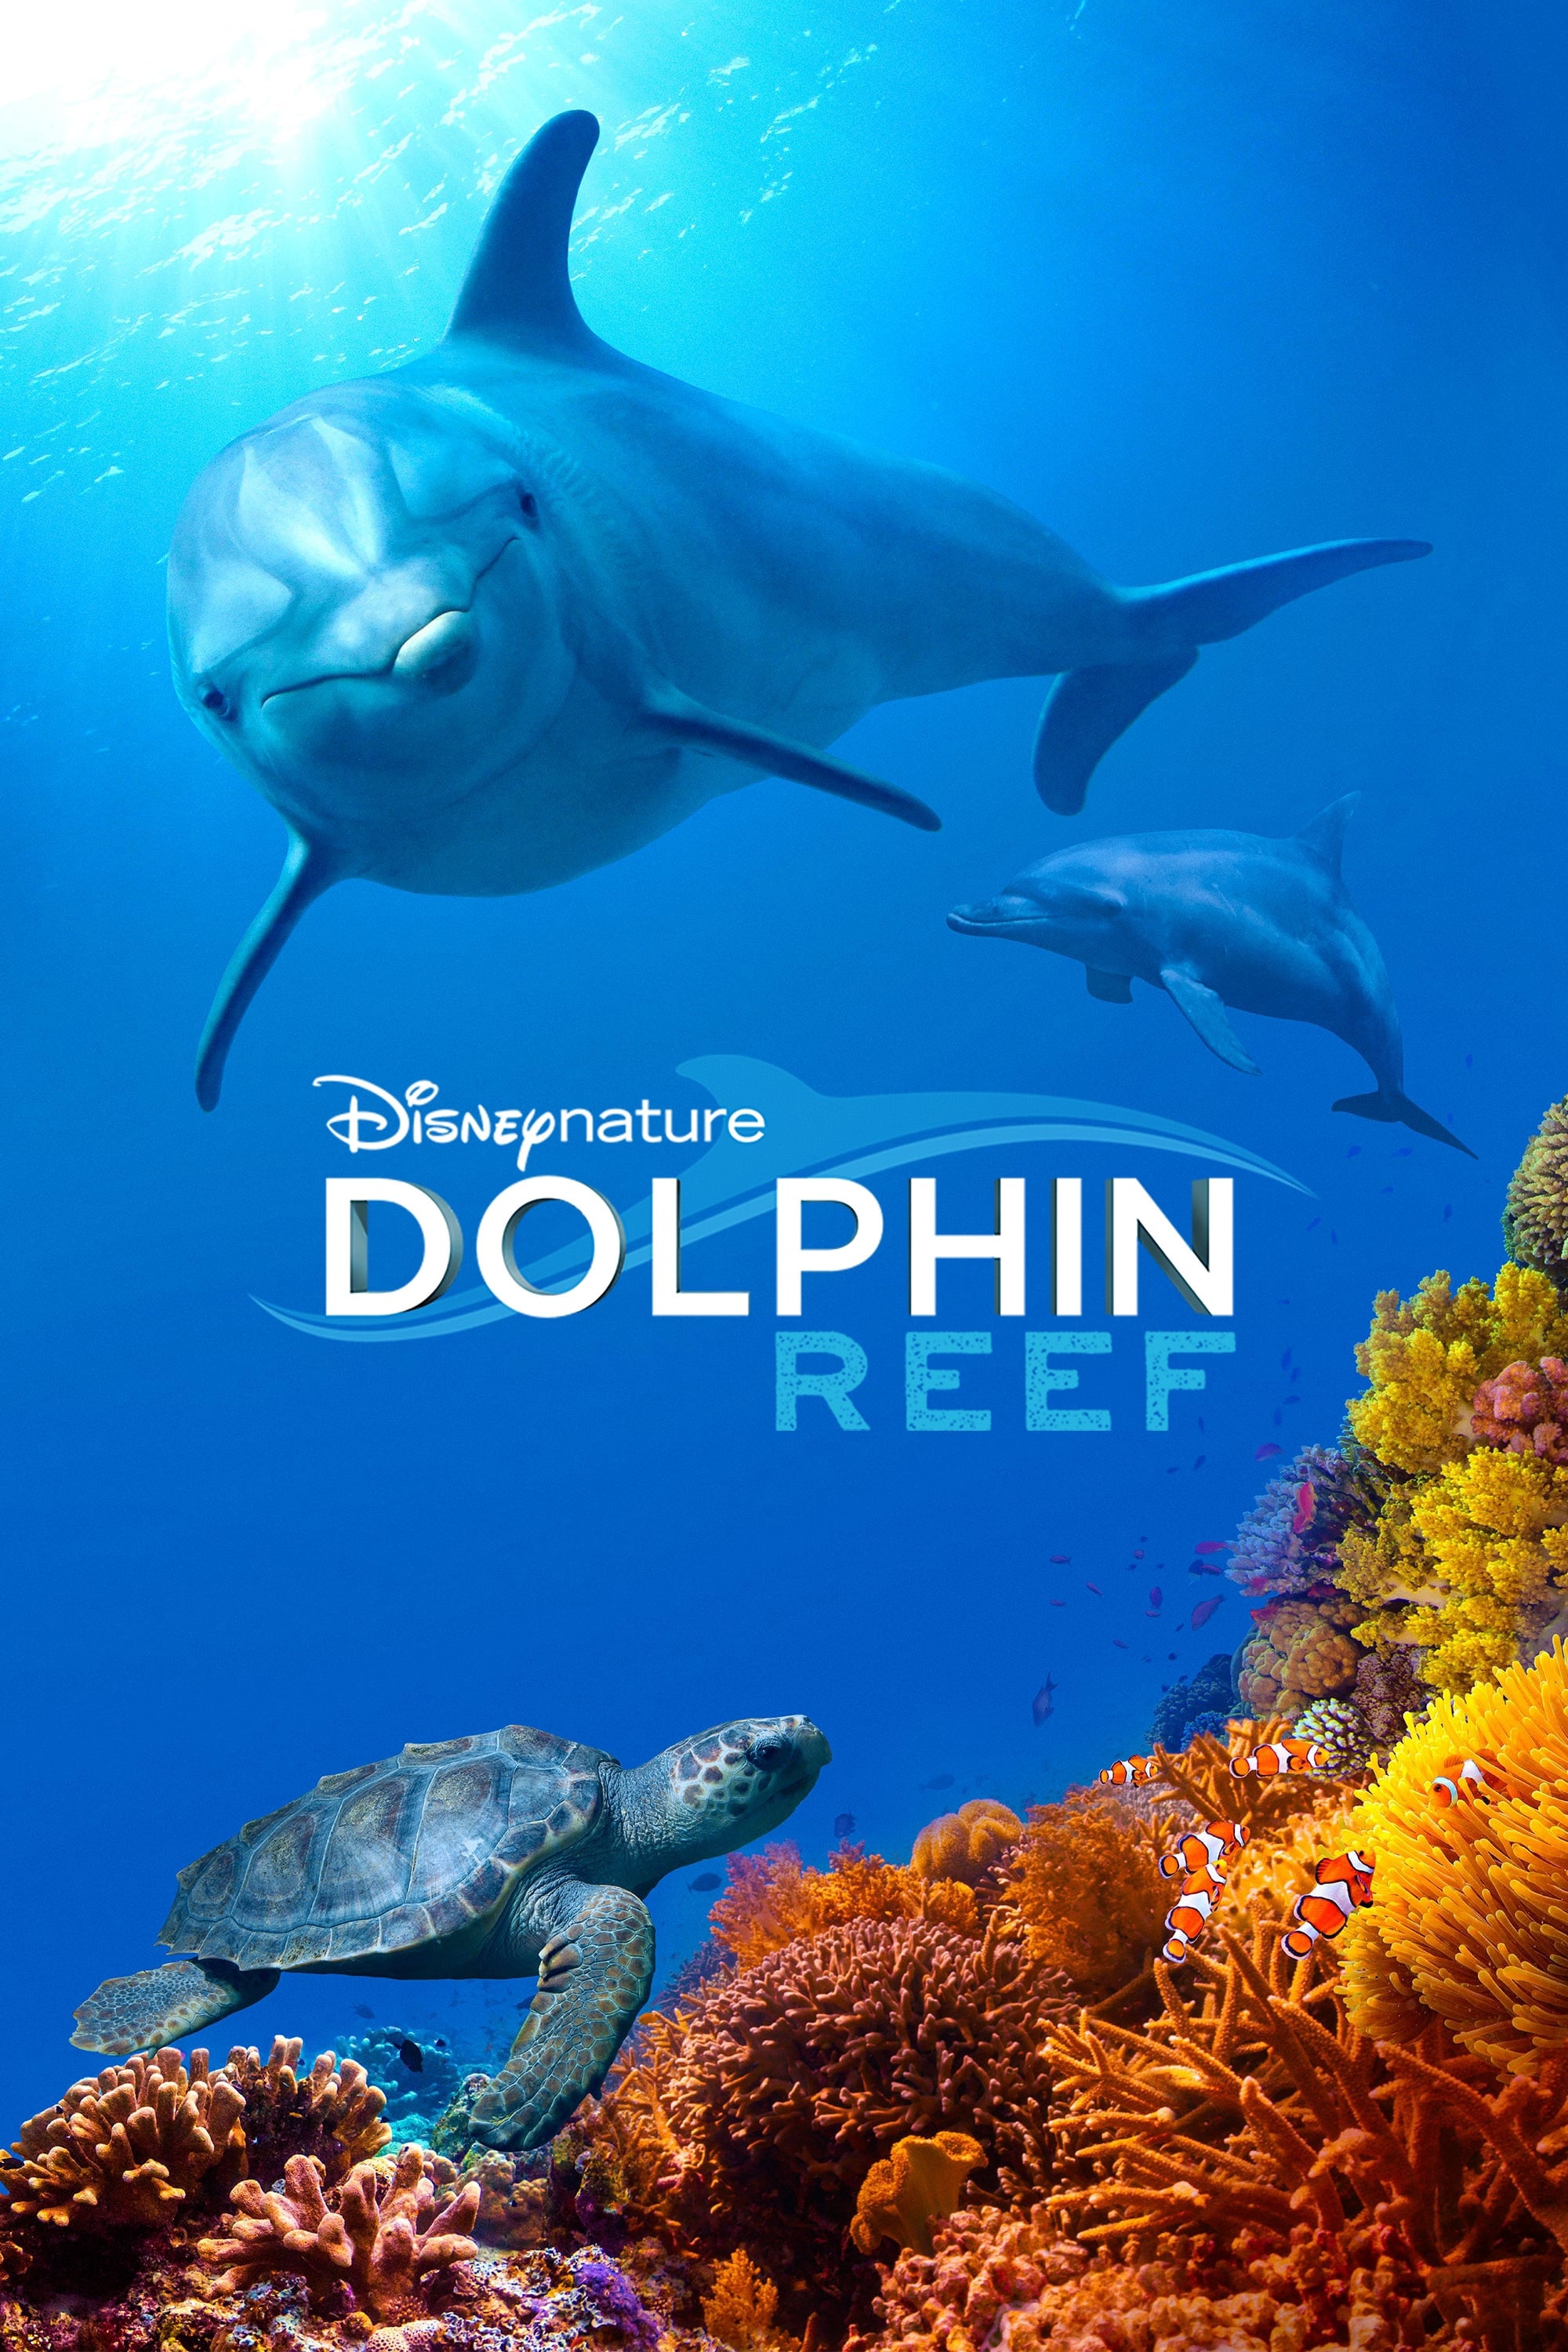 Dolphin Reef (2018)